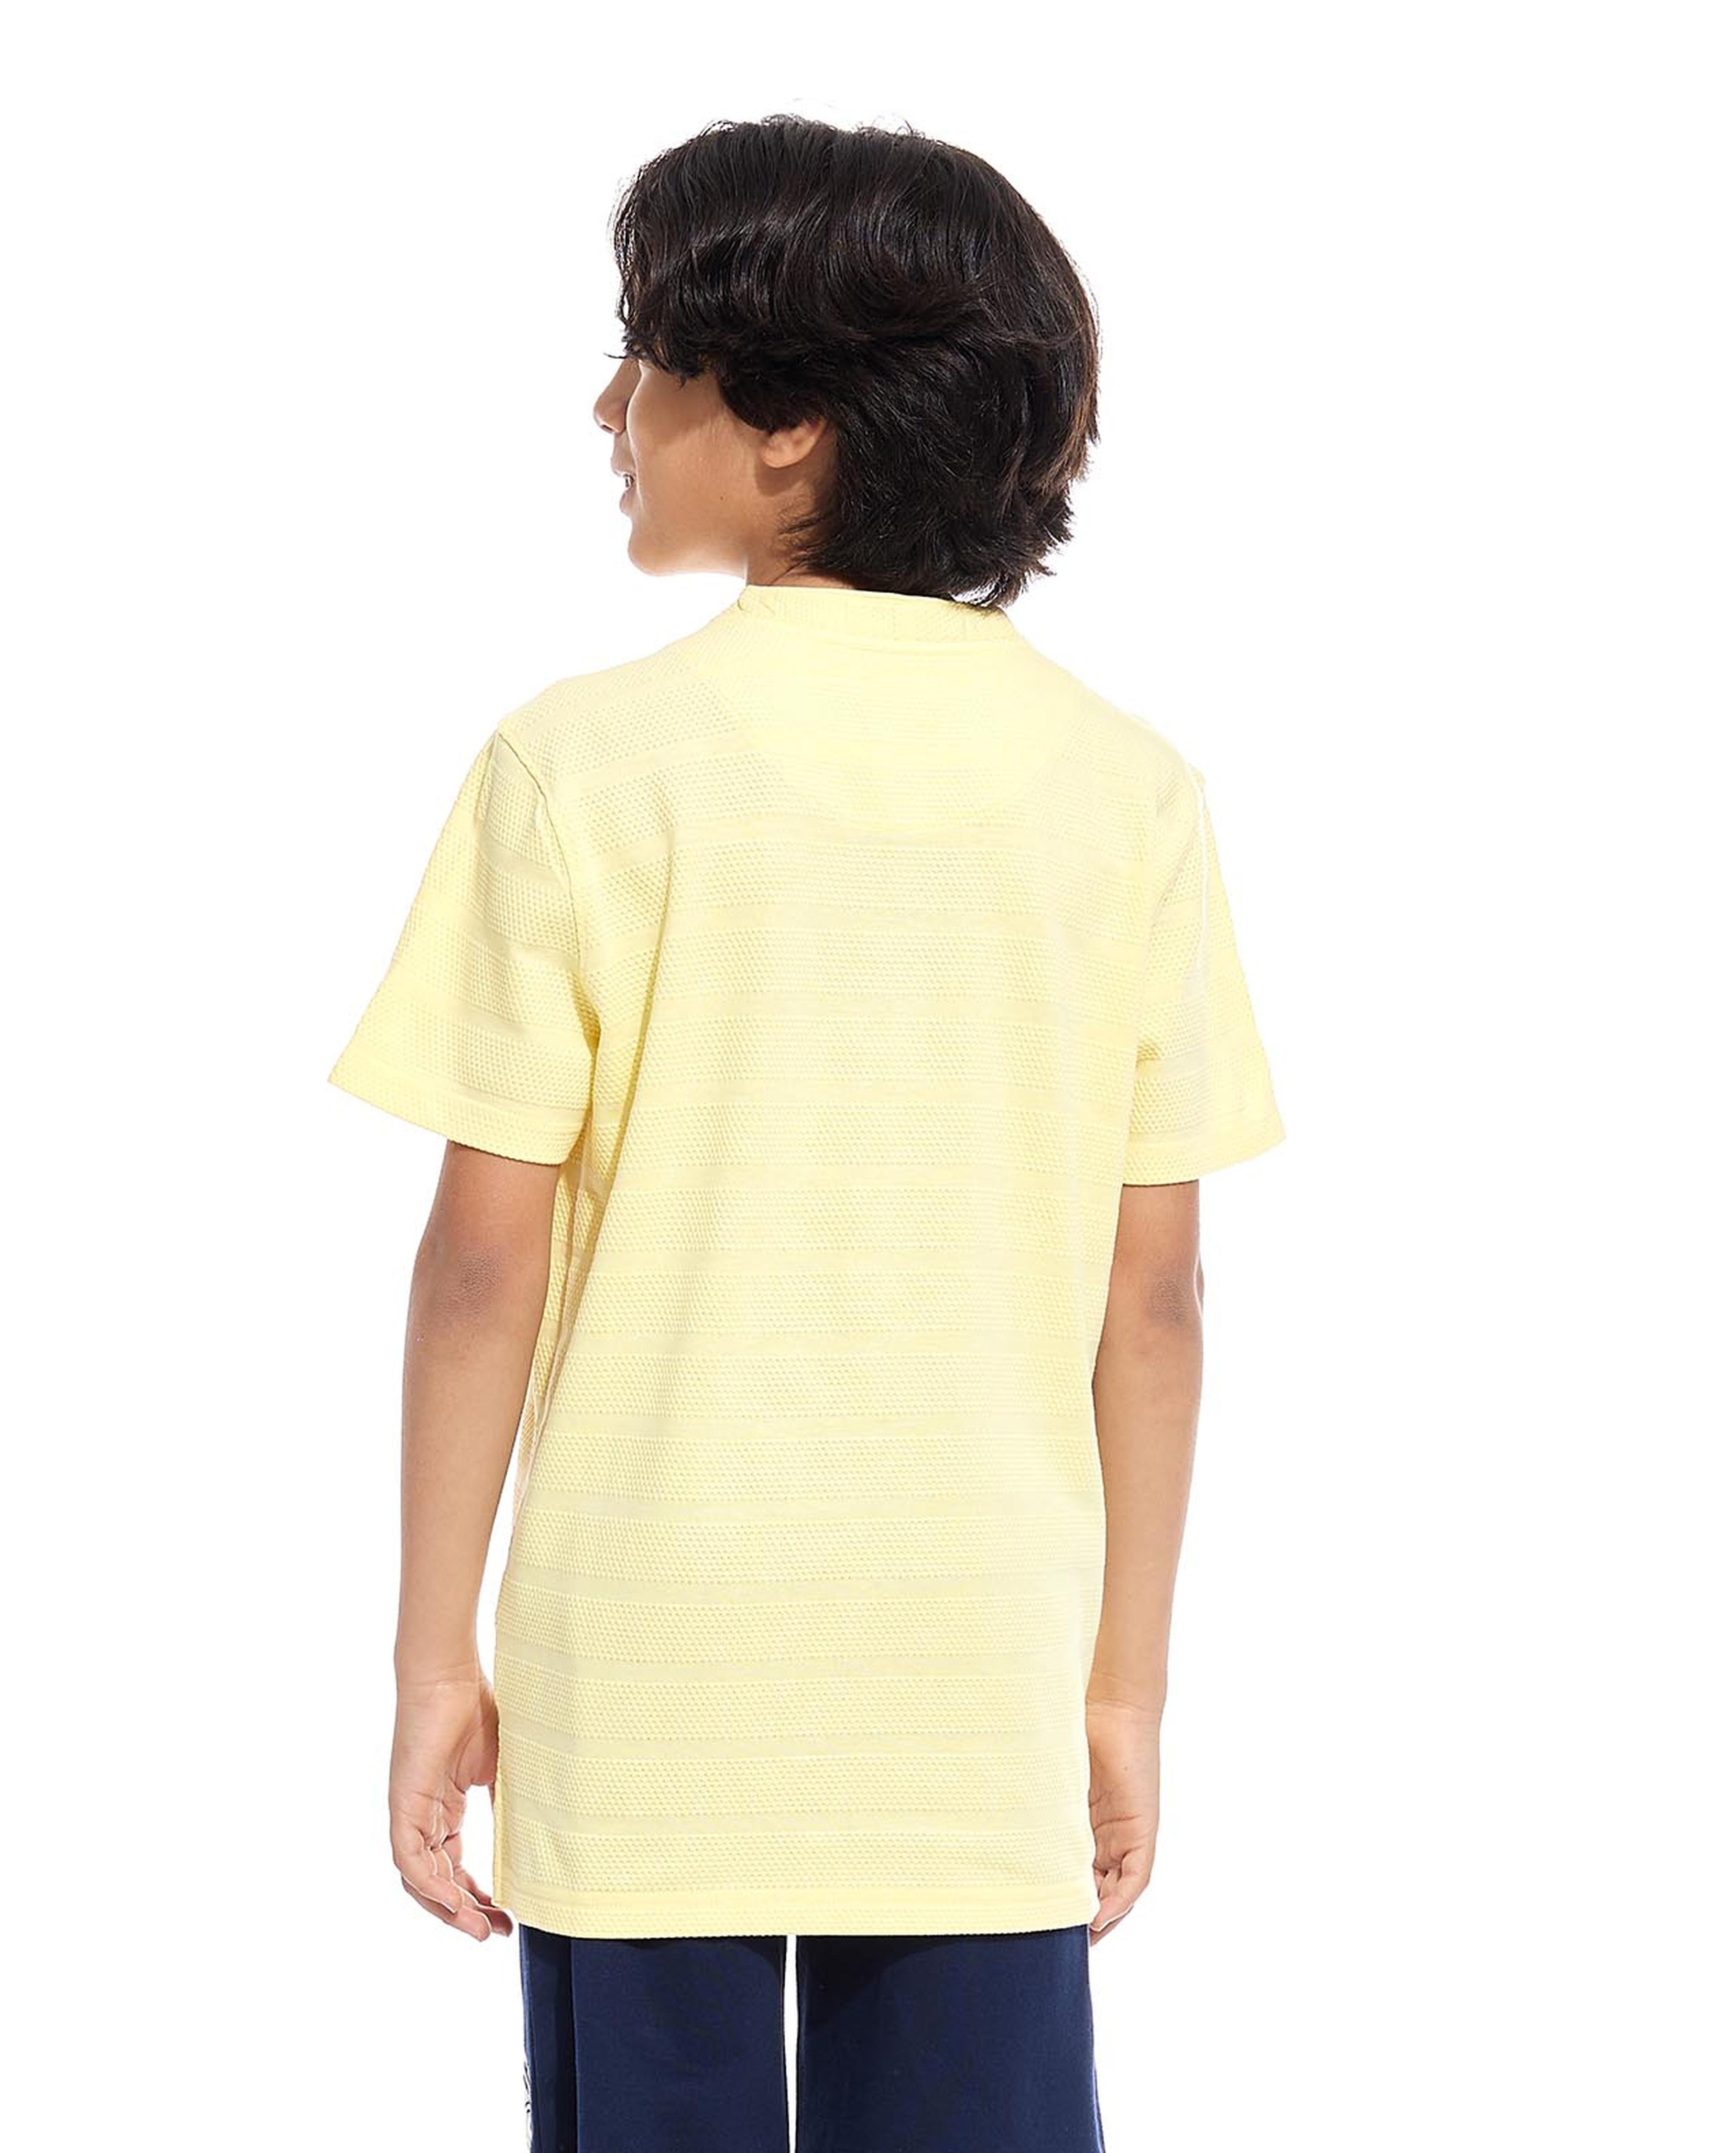 Textured T-Shirt with Mandarin Collar and Short Sleeves